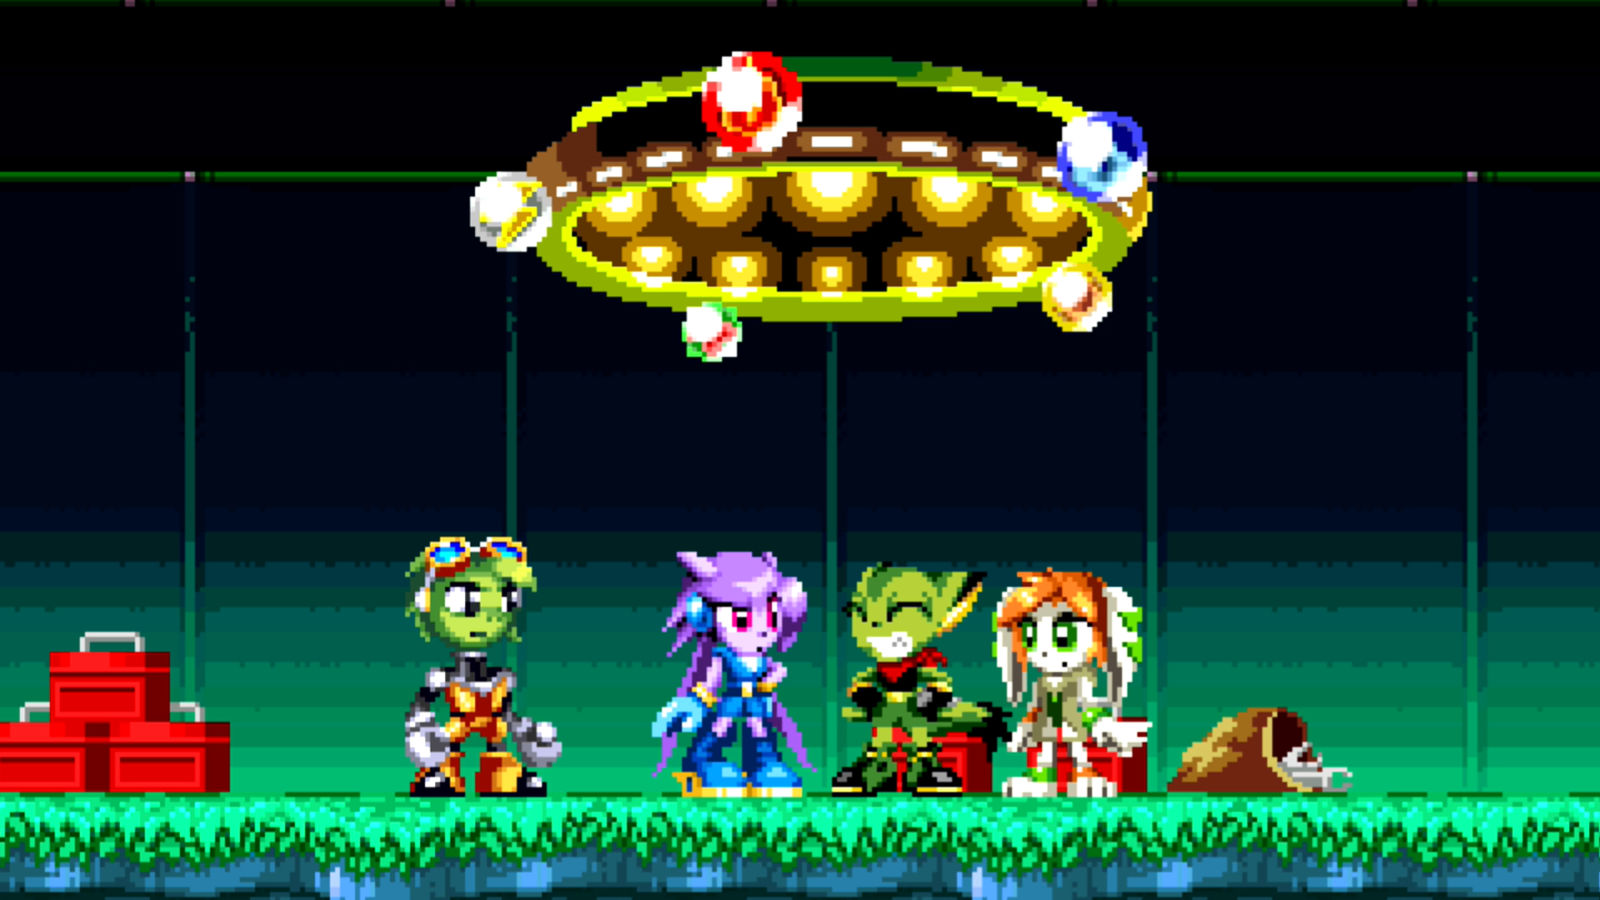 free download freedom planet switch